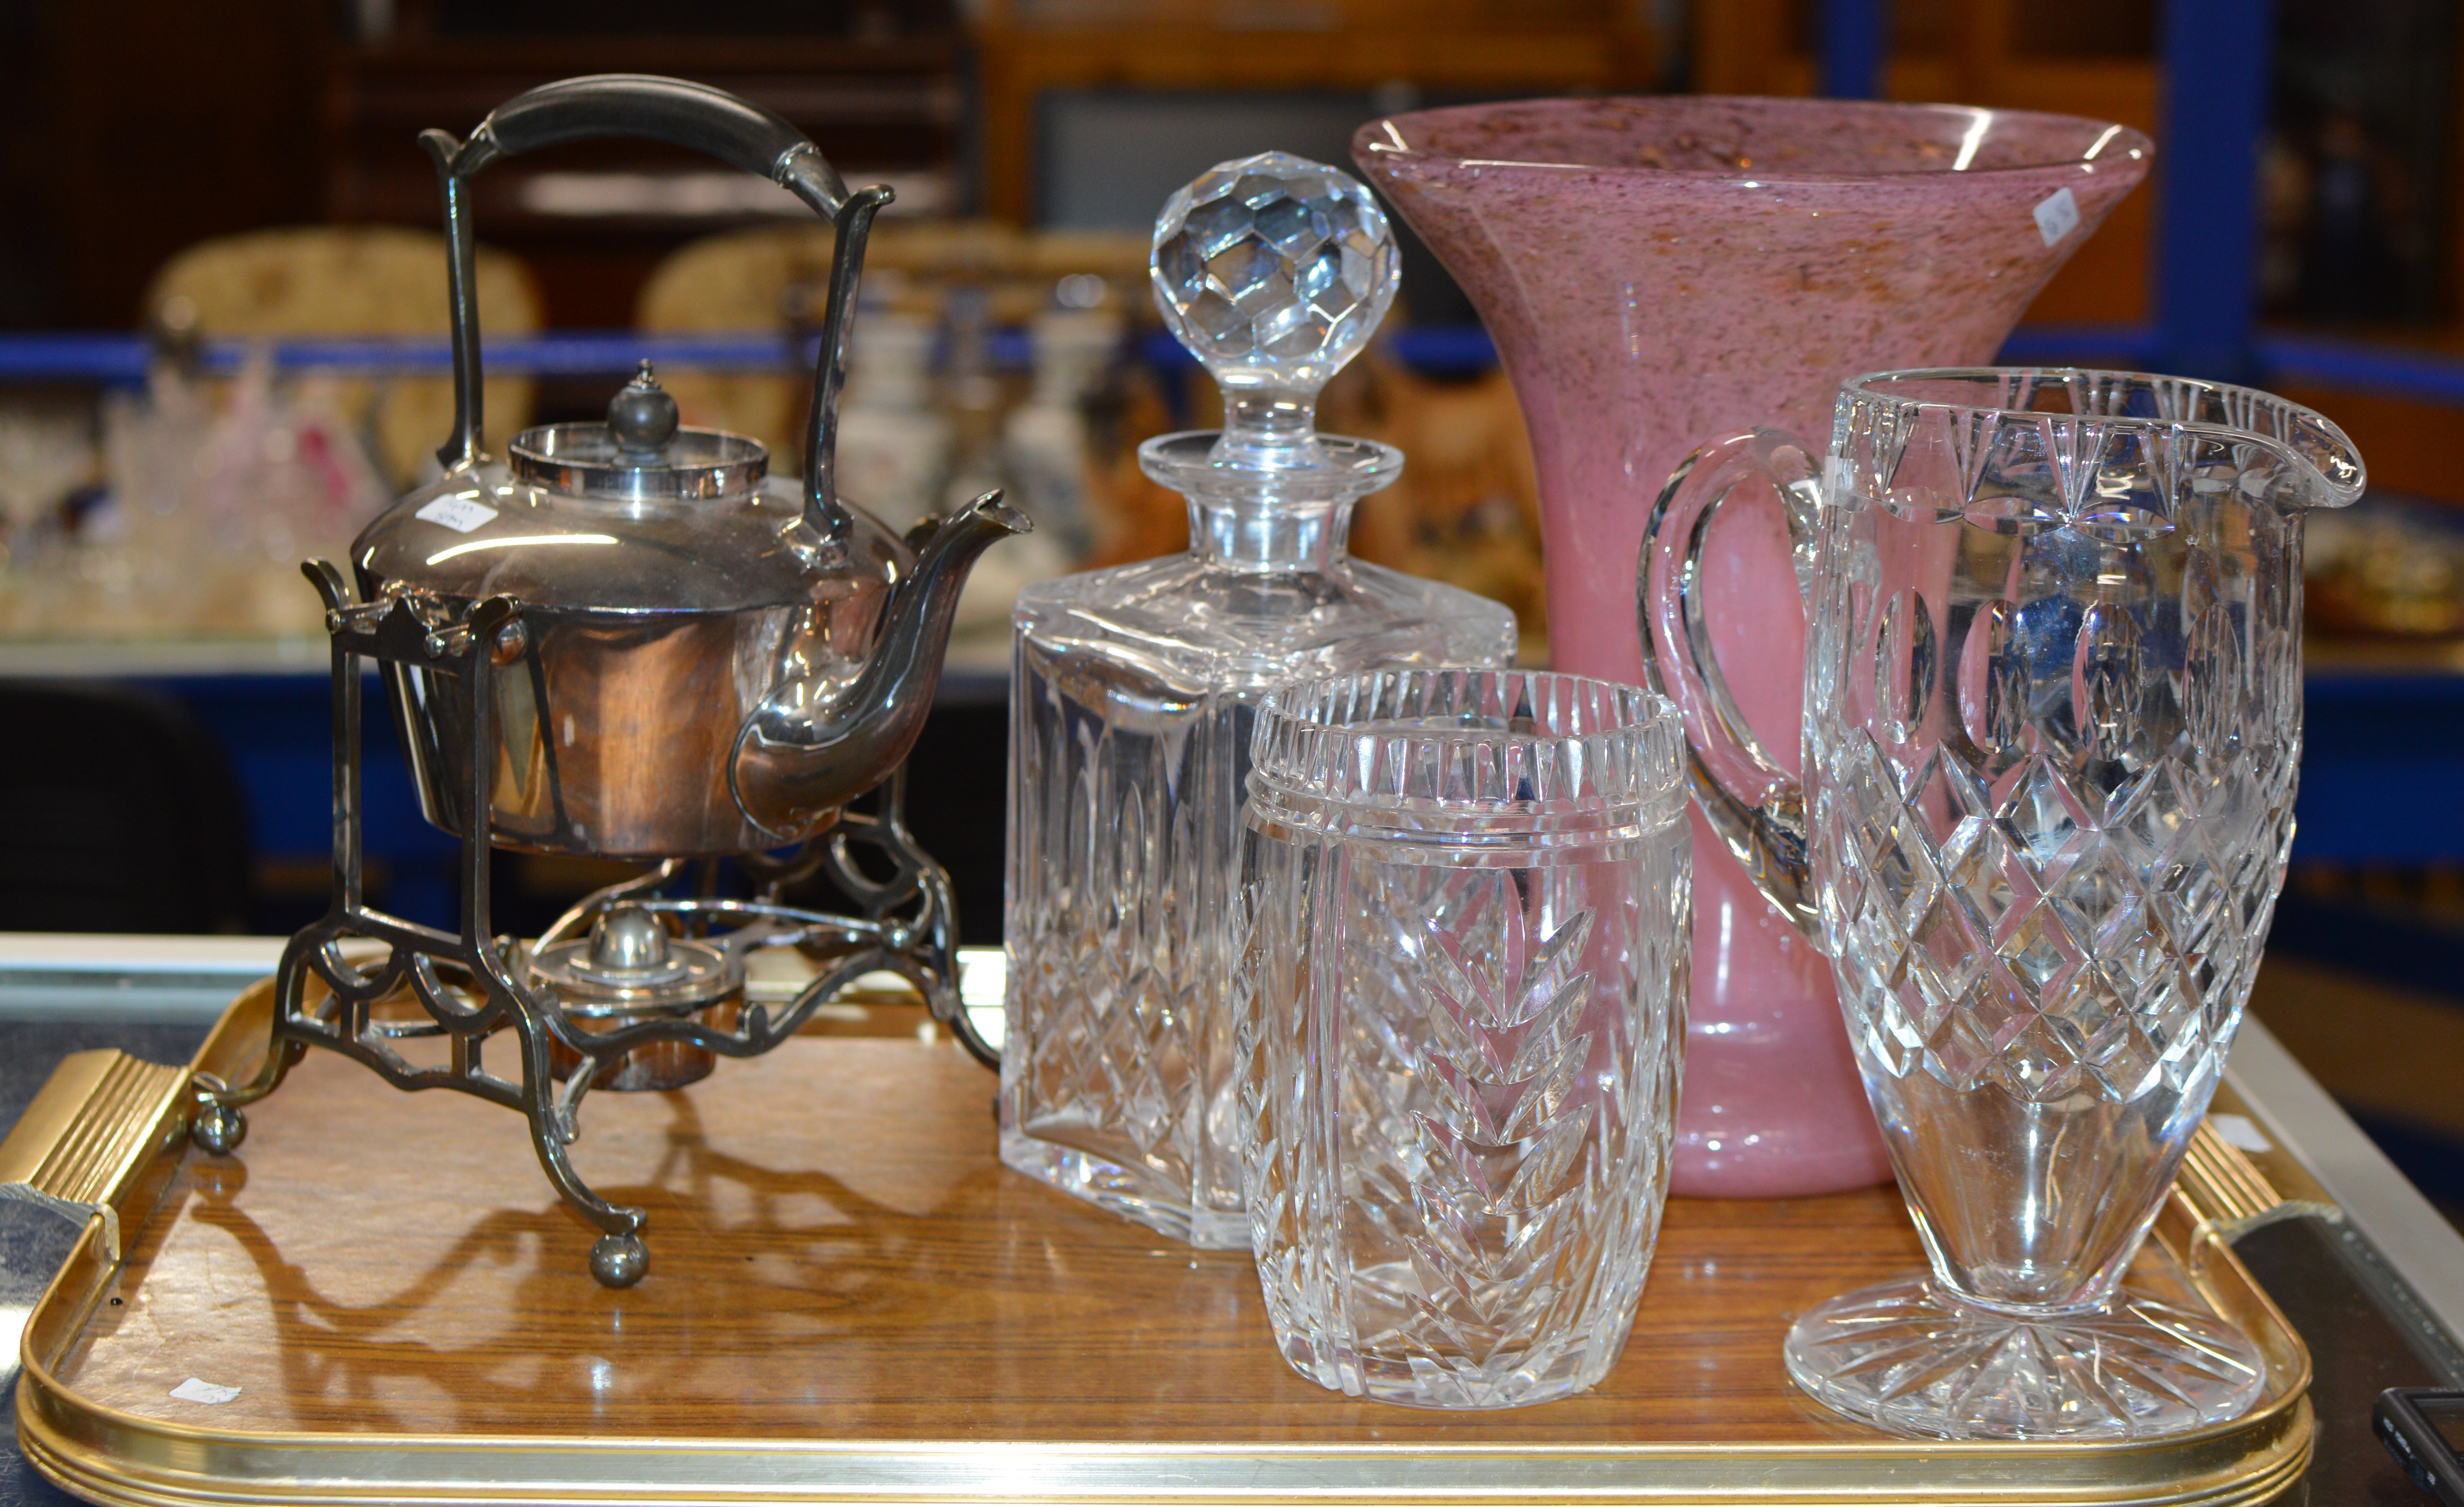 TRAY CONTAINING A SCOTTISH COLOURED GLASS VASE, CRYSTAL WARE & EP KETTLE ON STAND